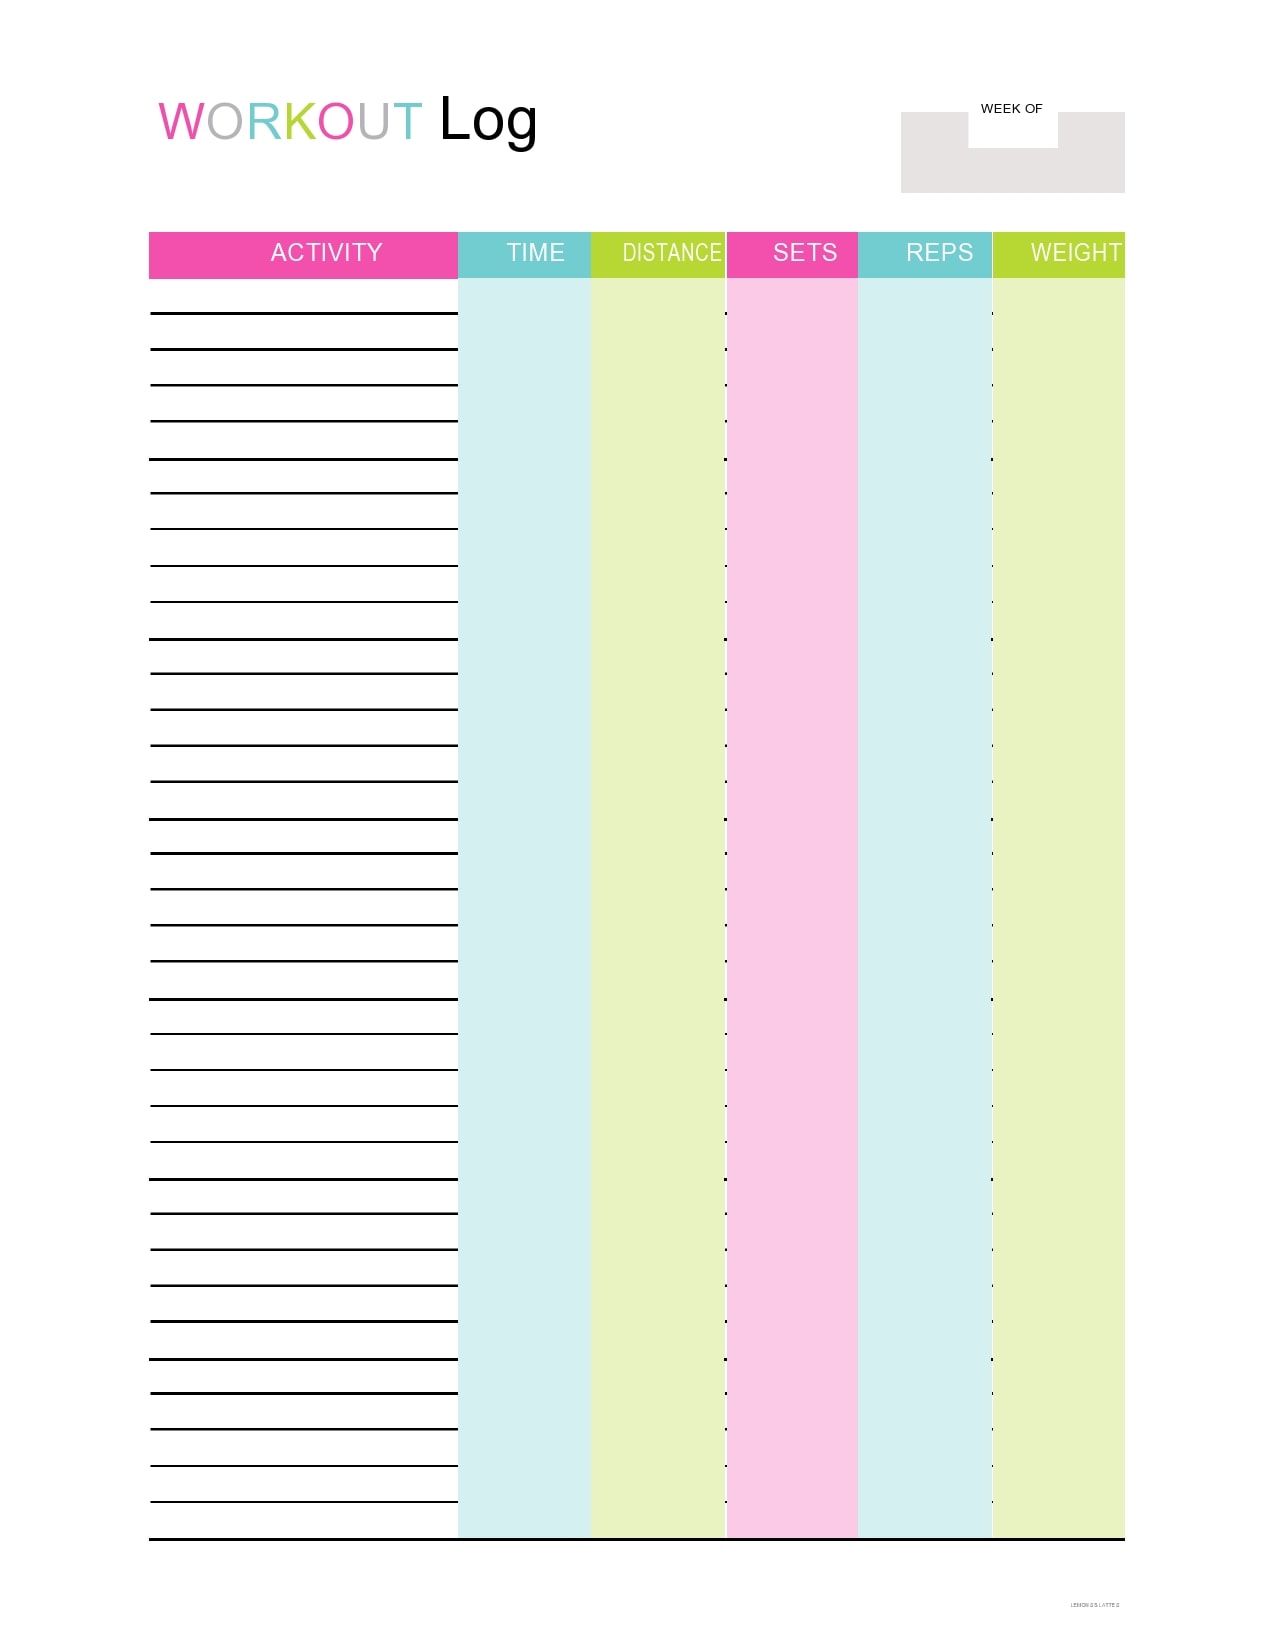 30-useful-workout-log-templates-free-spreadsheets